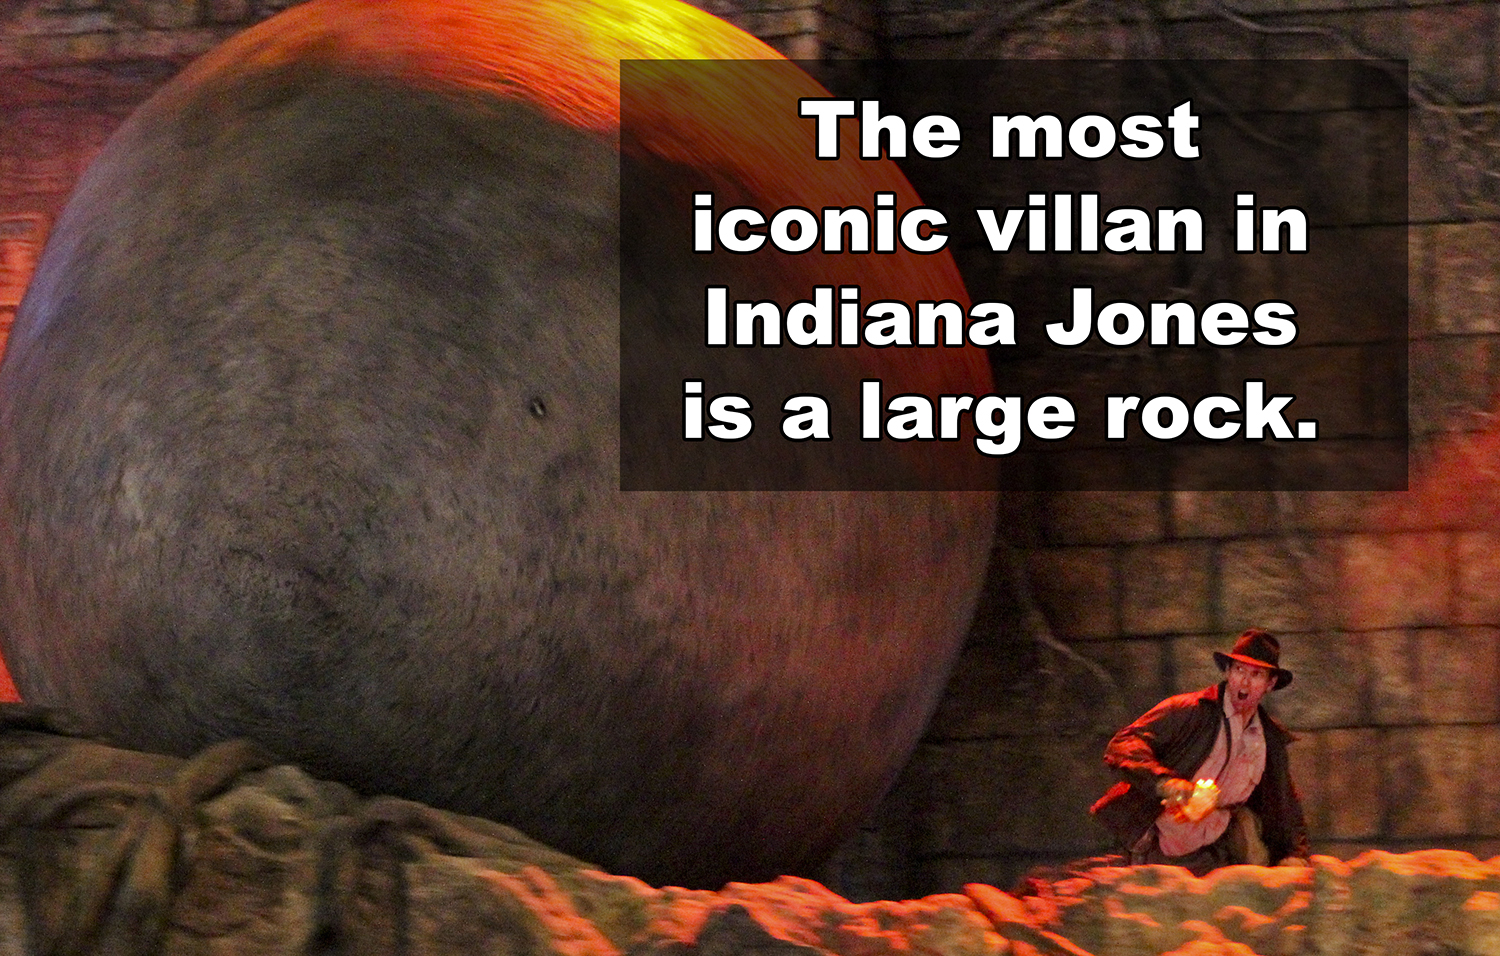 photo caption - The most iconic villan in Indiana Jones is a large rock.